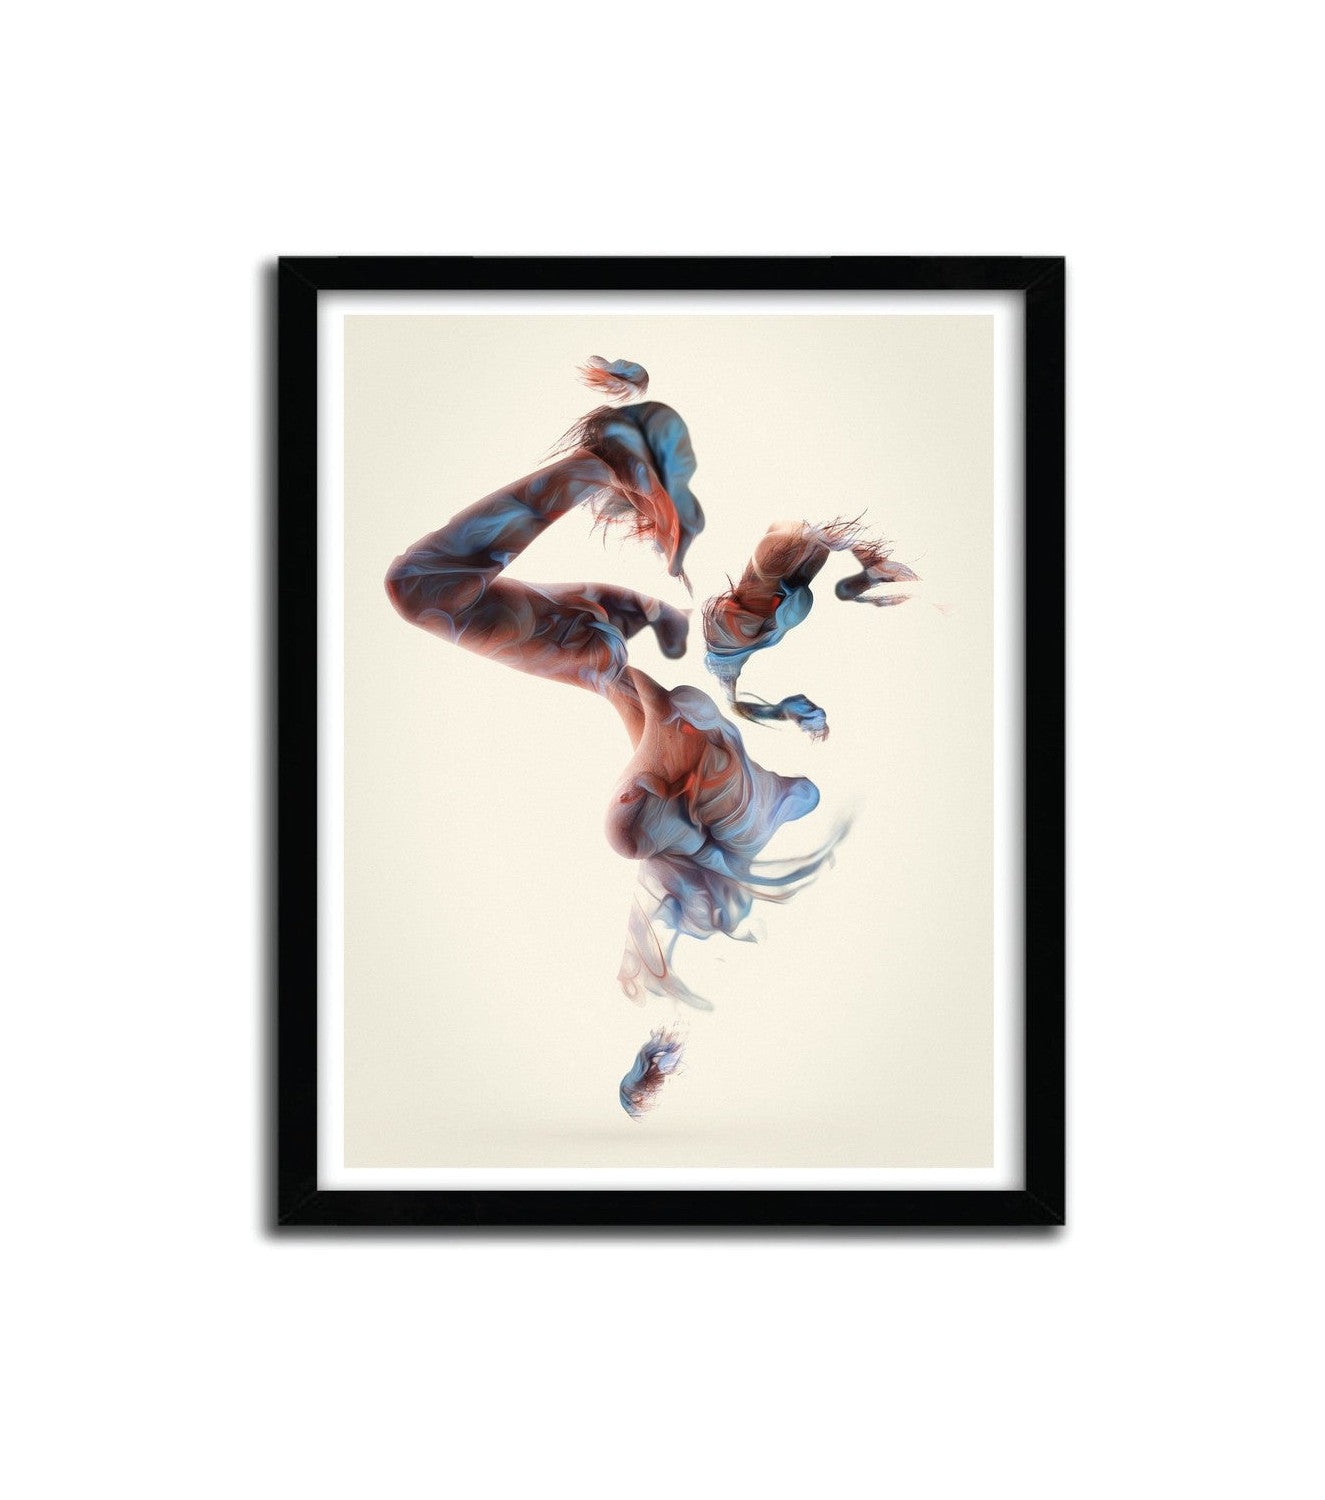 Affiche TRIVIAL EXPOSE 7 by ALBERTO SEVESO